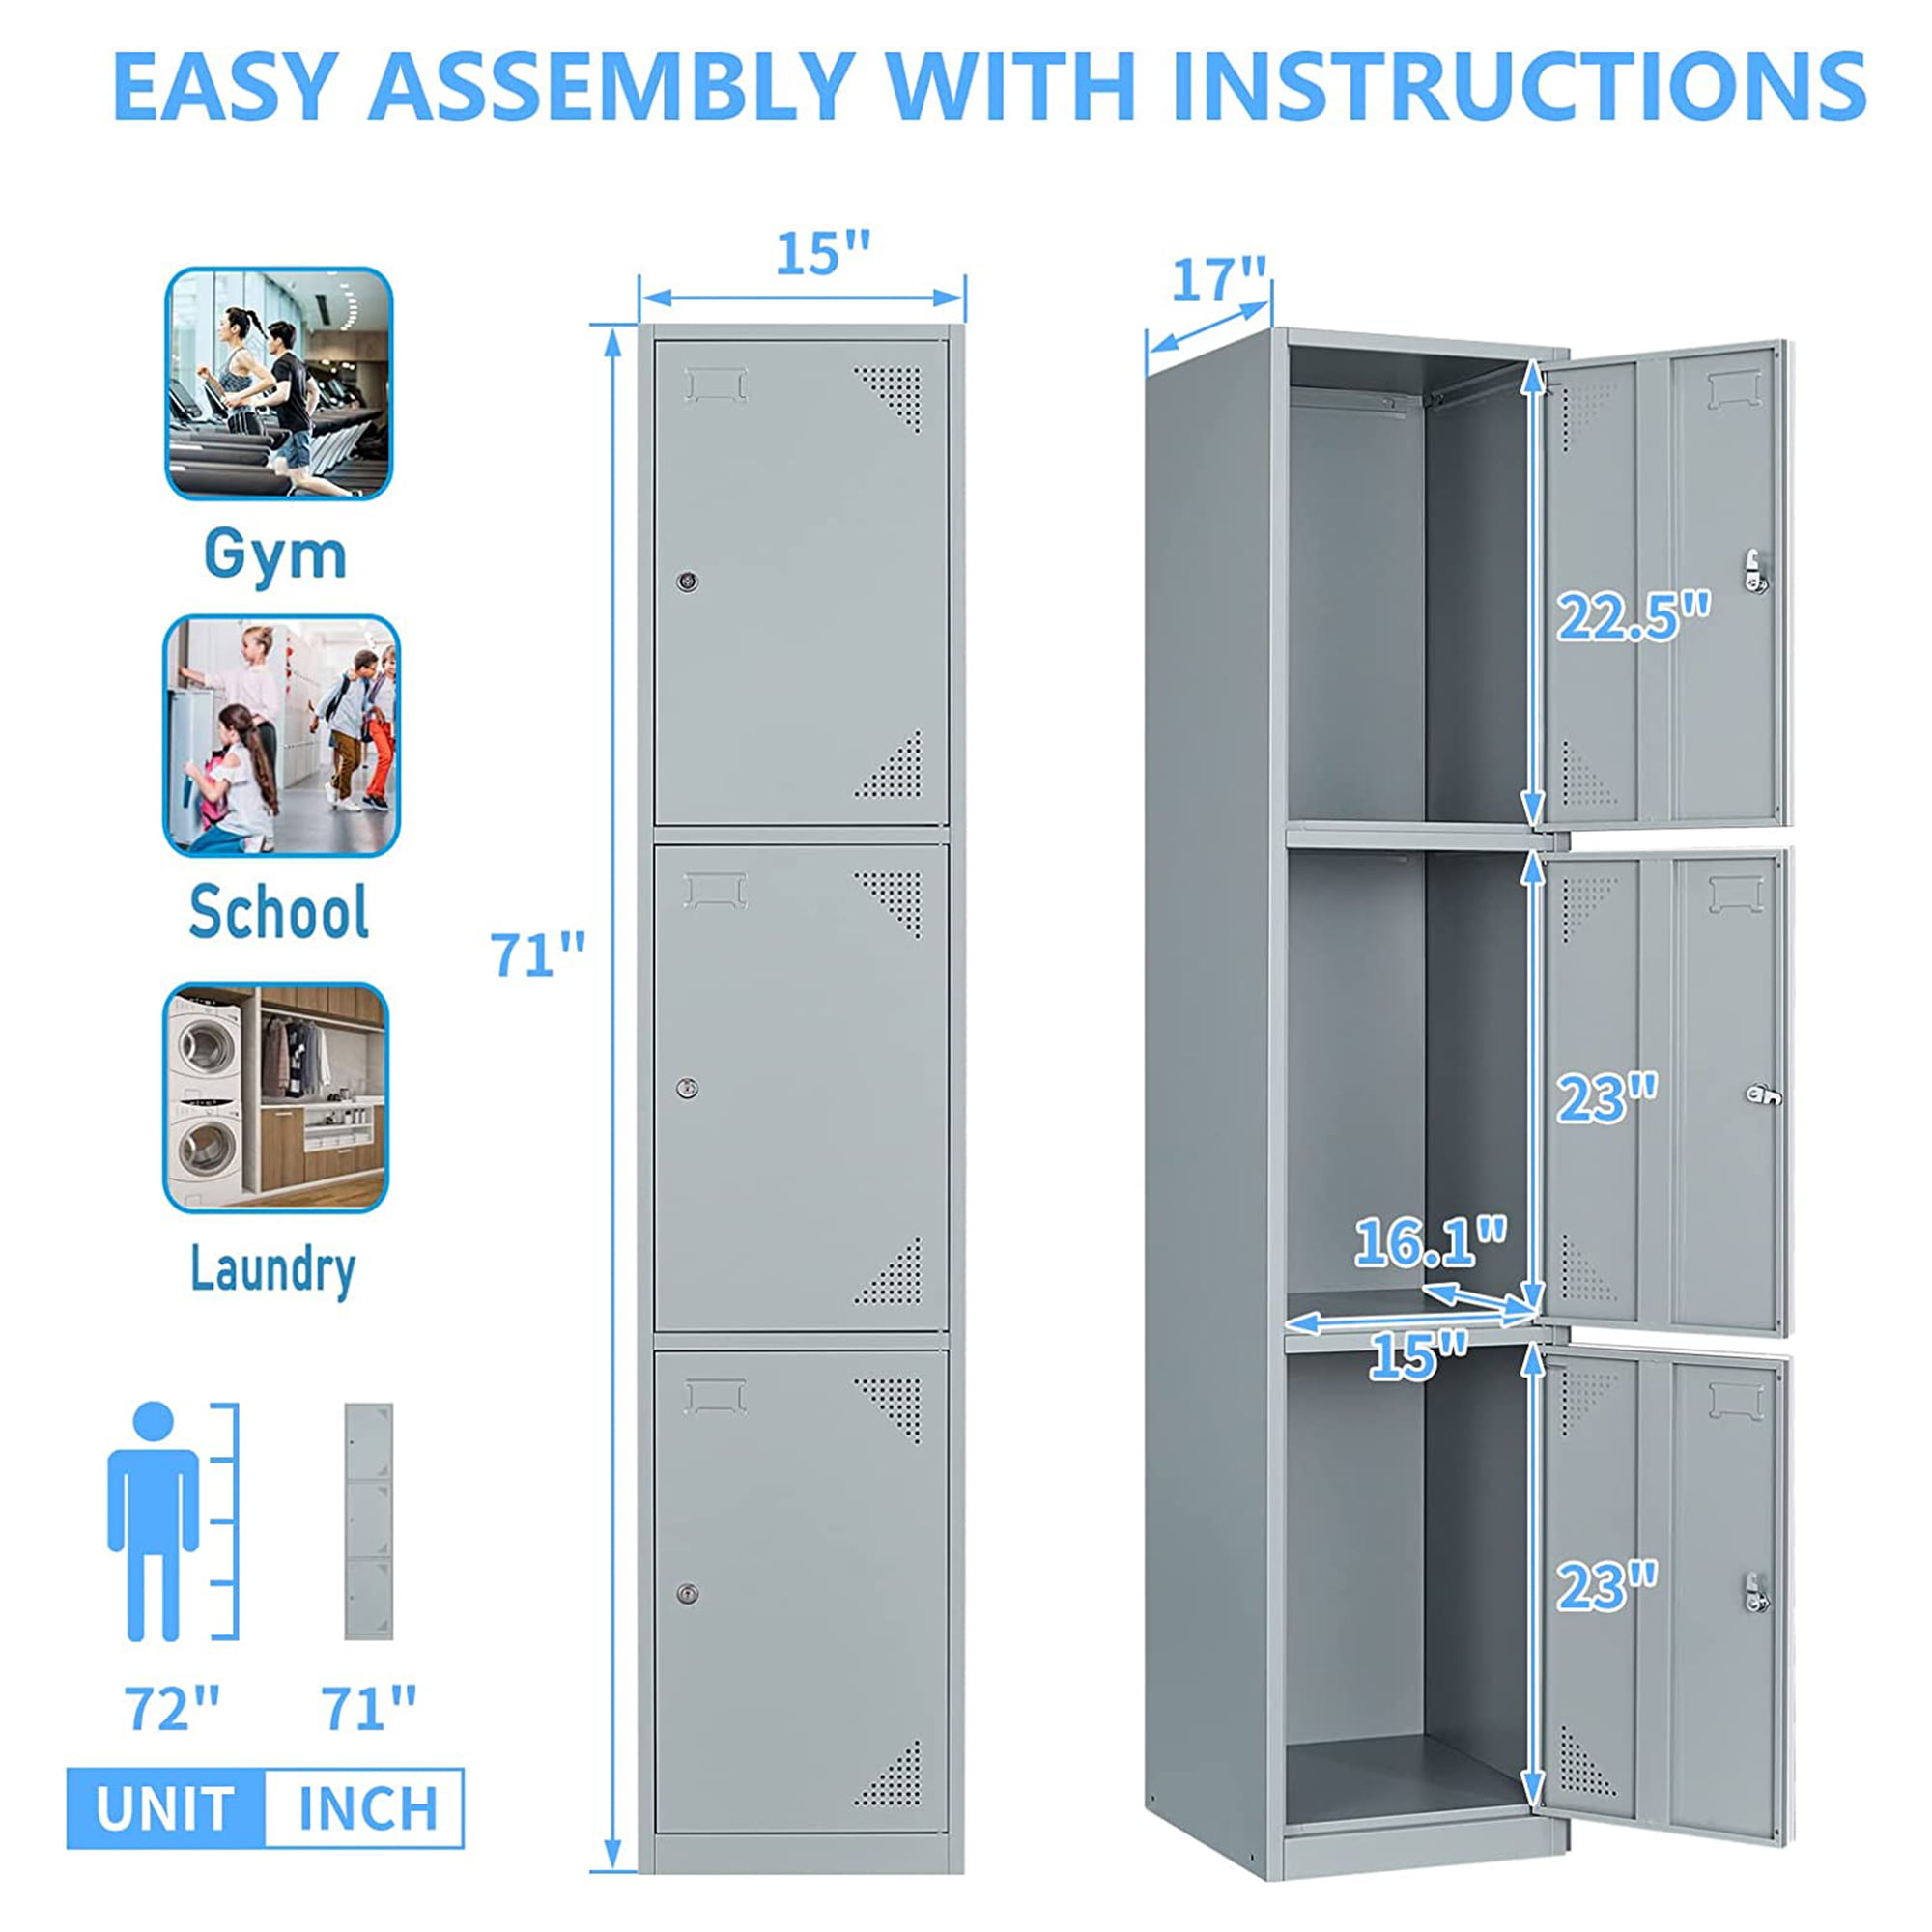 WISUNO 3 Door Vertical Stackable Storage Cabinet with Lock,Anti-Failing  Device, Metal Lcoker,Organizer for Office, Home, Gym, School,Employee,Kids.